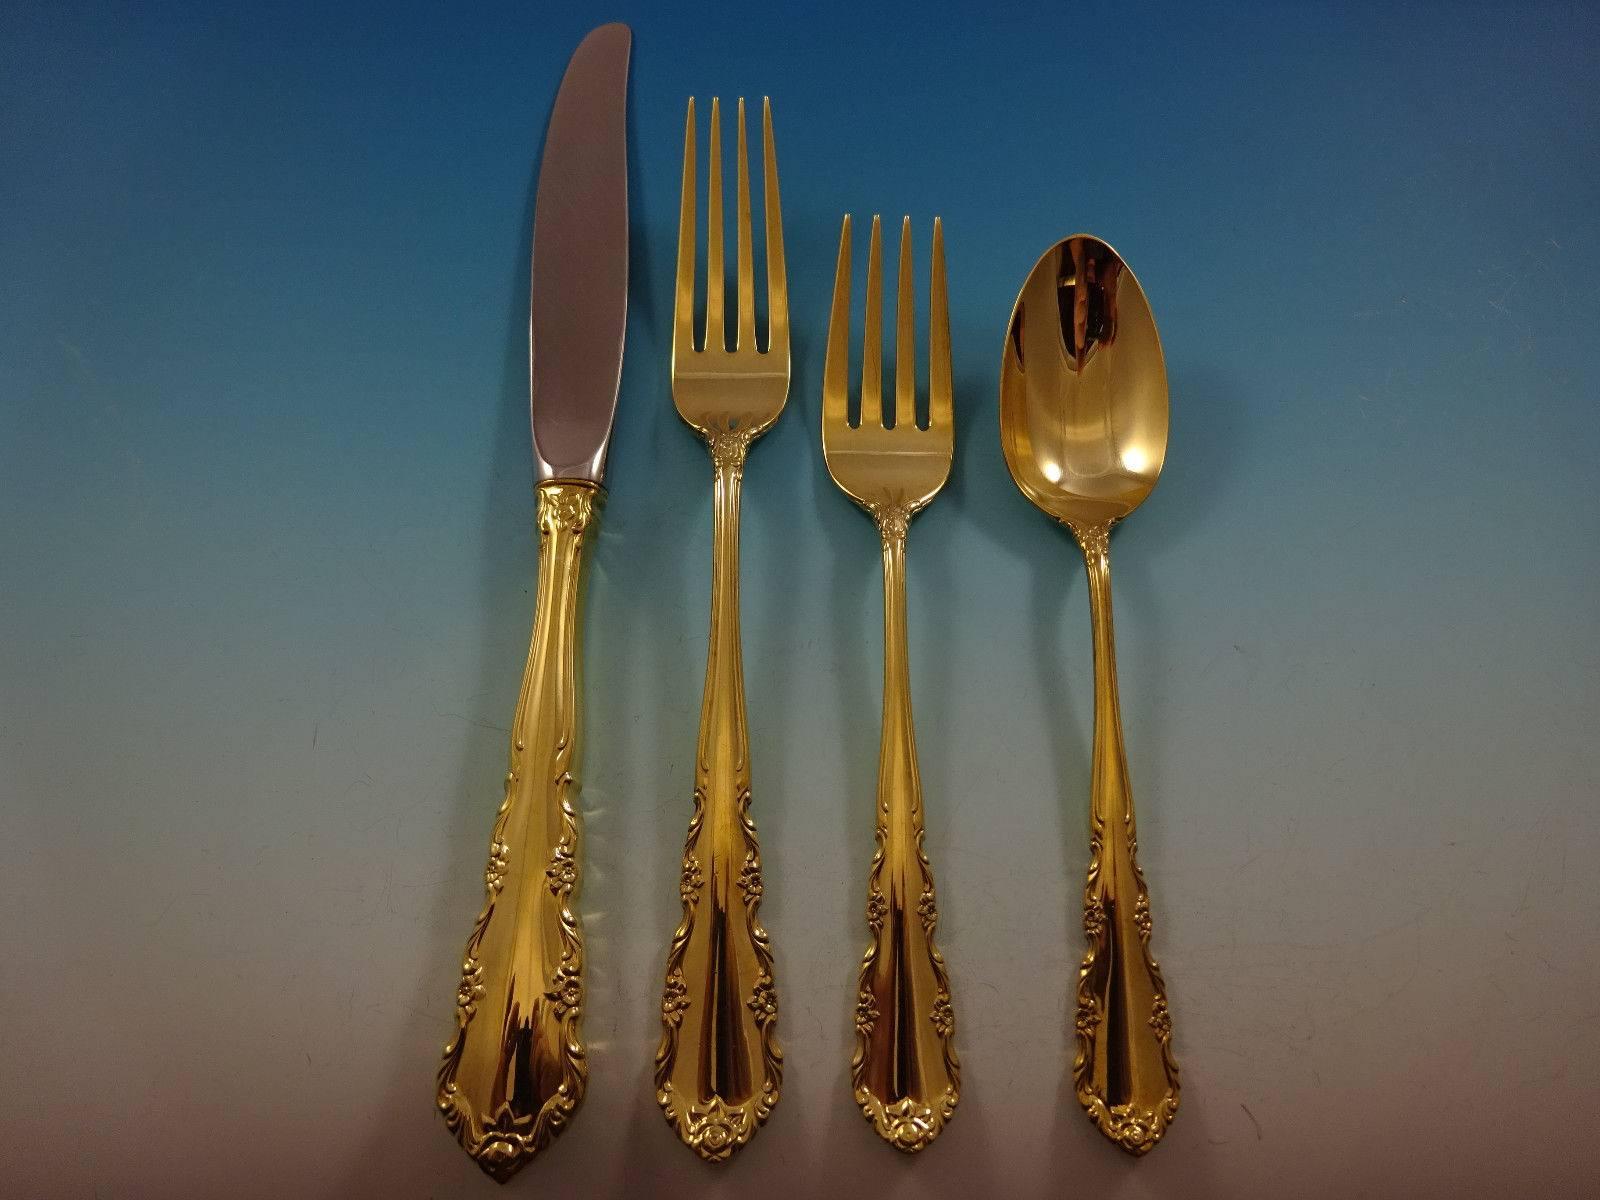 Gorgeous Shenandoah gold by Wallace Sterling Silver flatware set, 48 pieces. Gold flatware is on trend and makes a bold statement on your table. 

This set is vermeil (completely gold-washed) and includes:
 
12 knives, 8 7/8